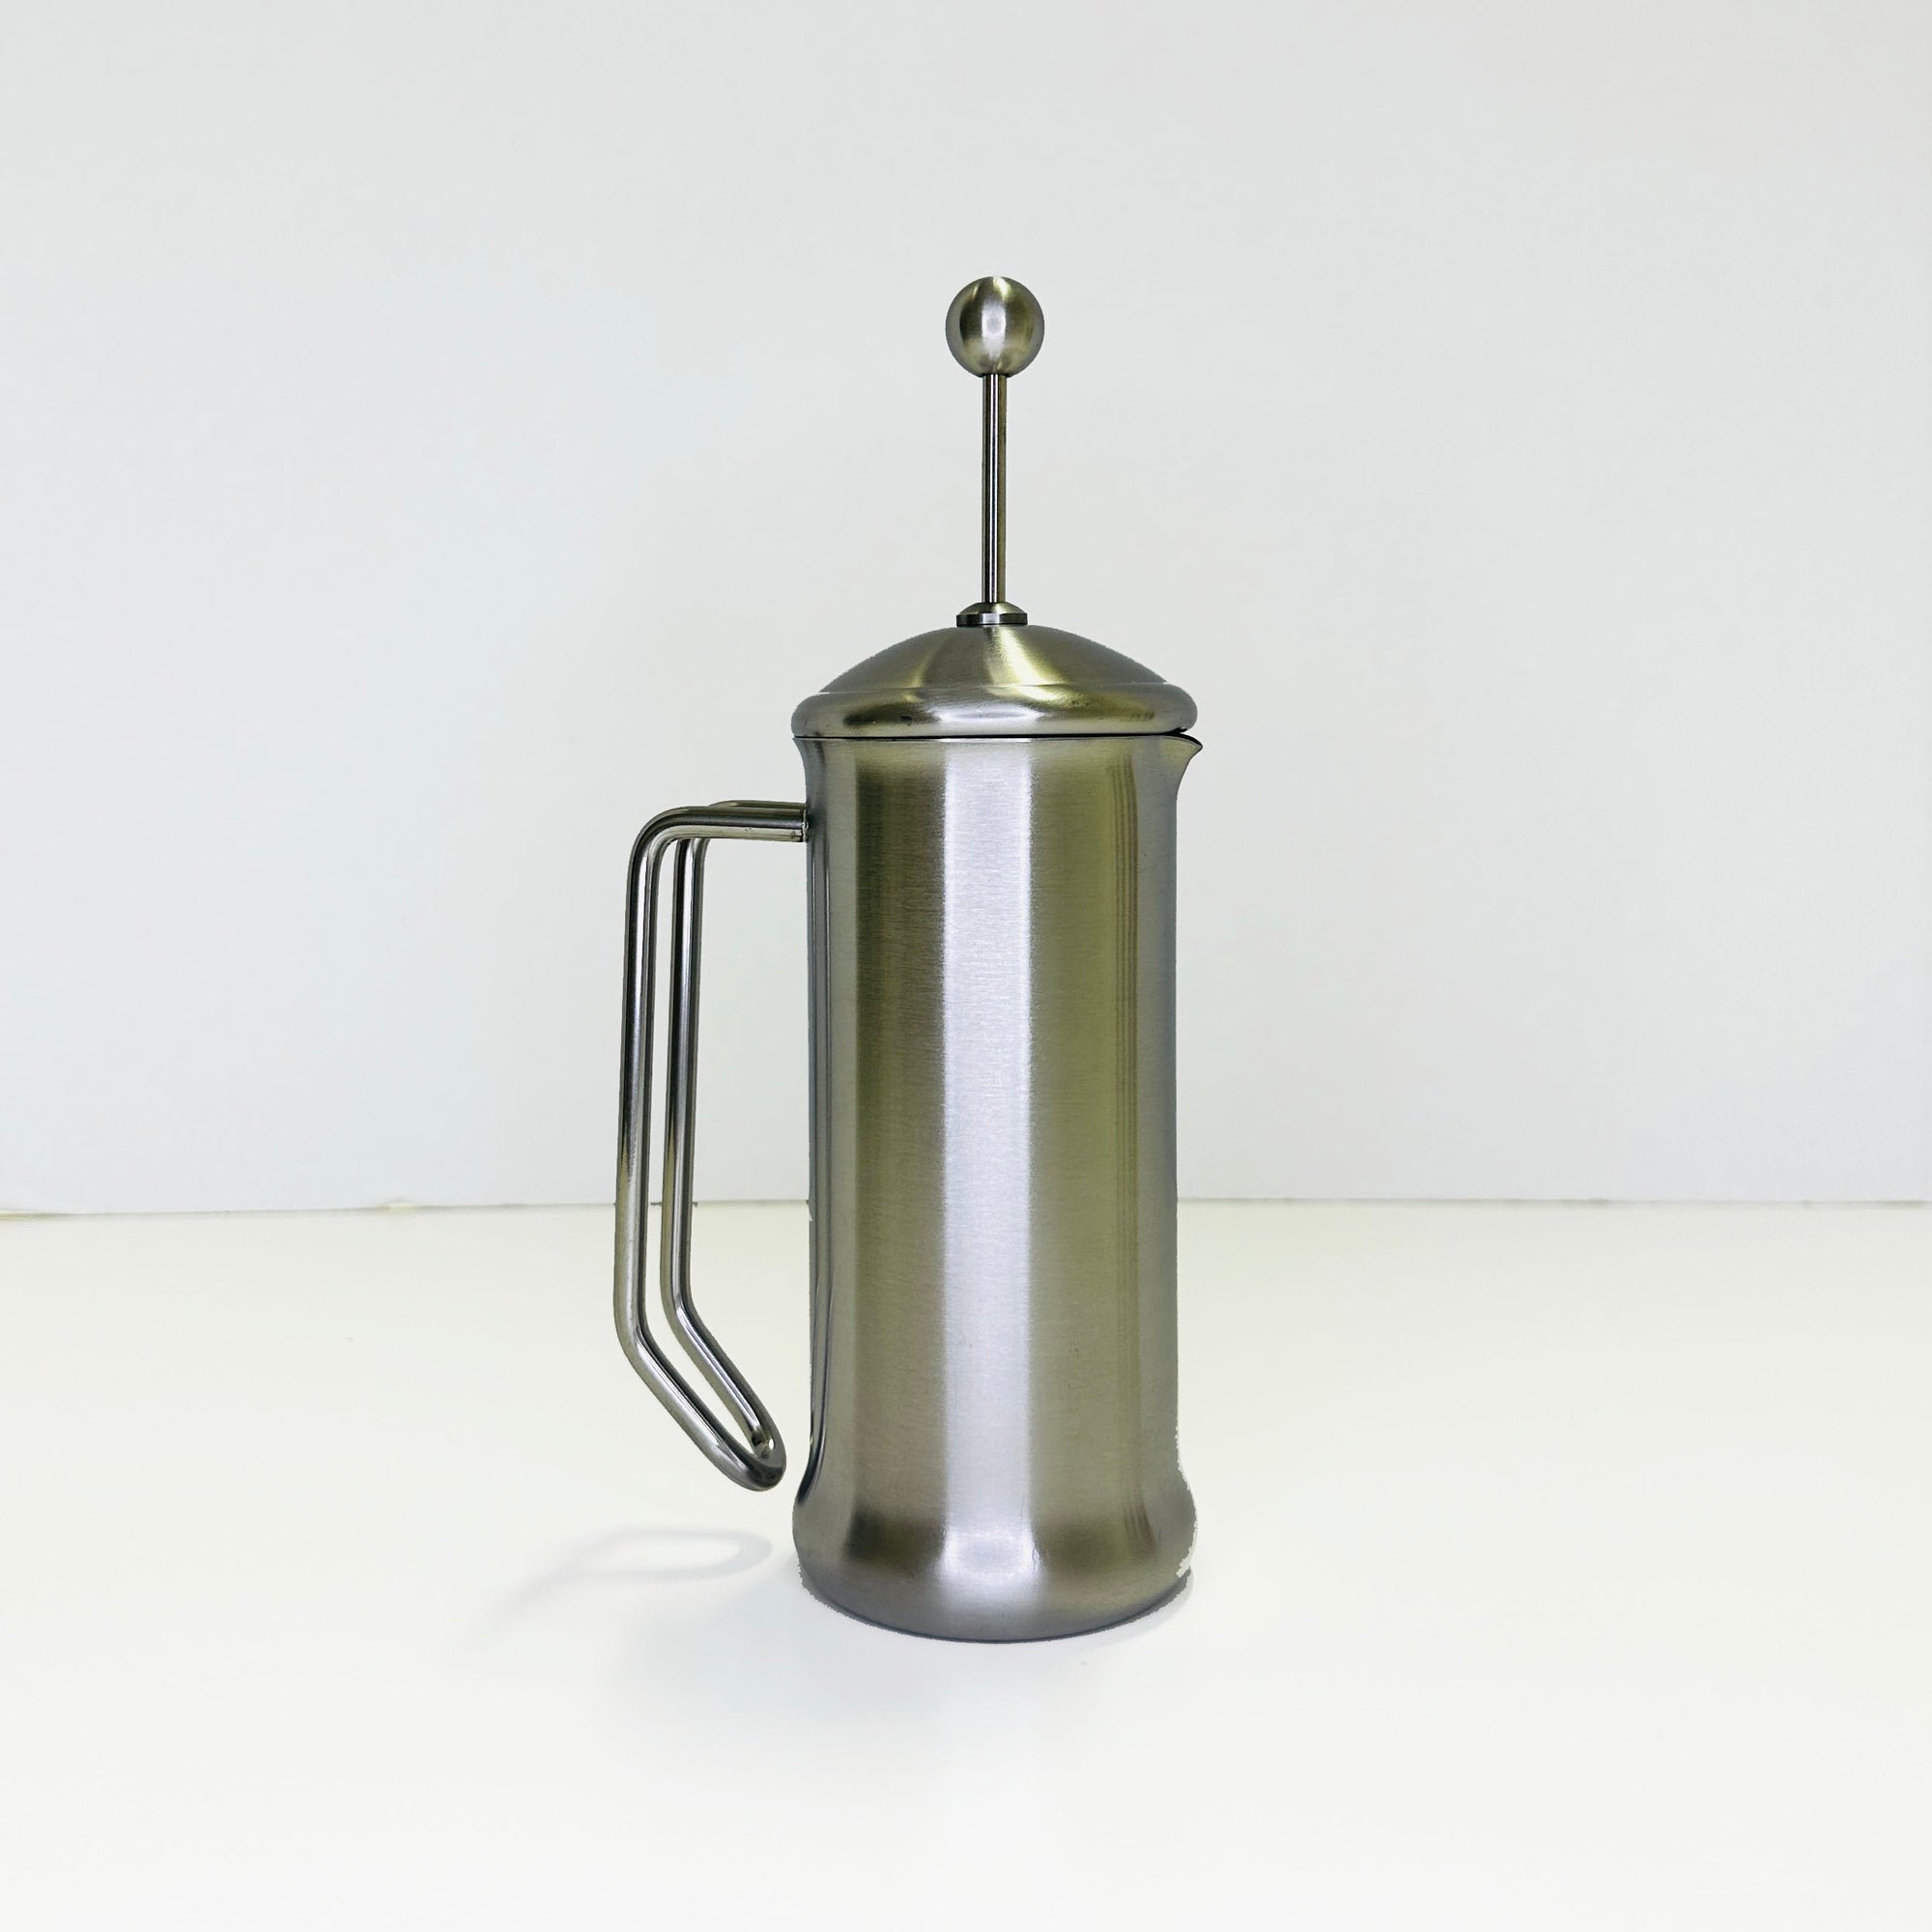 Stainless Steel Cafetiere